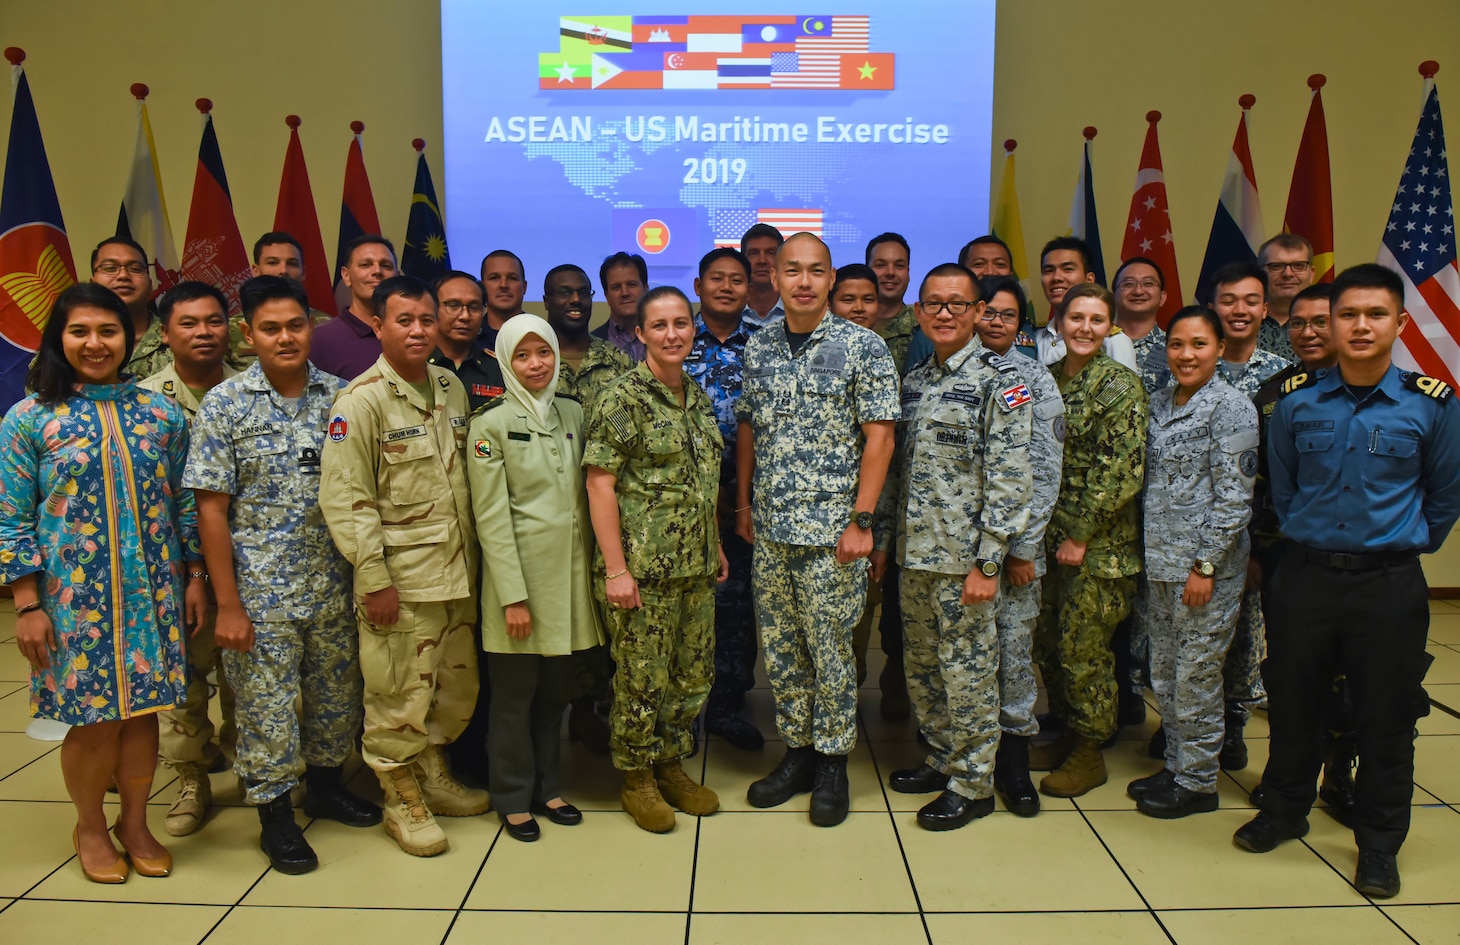 CHANGI NAVAL BASE, Singapore (September 06, 2019) U.S. Navy Sailors and representatives of ASEAN member state maritime forces gather for a photo during the ASEAN-U.S. Maritime Exercise (AUMX). The first ASEAN-U.S. Maritime Exercise, co-led by the U.S. and Royal Thai navies, includes maritime forces from the U.S. and all ten ASEAN member states. AUMX promotes shared commitments to maritime partnerships, security and stability in Southeast Asia.